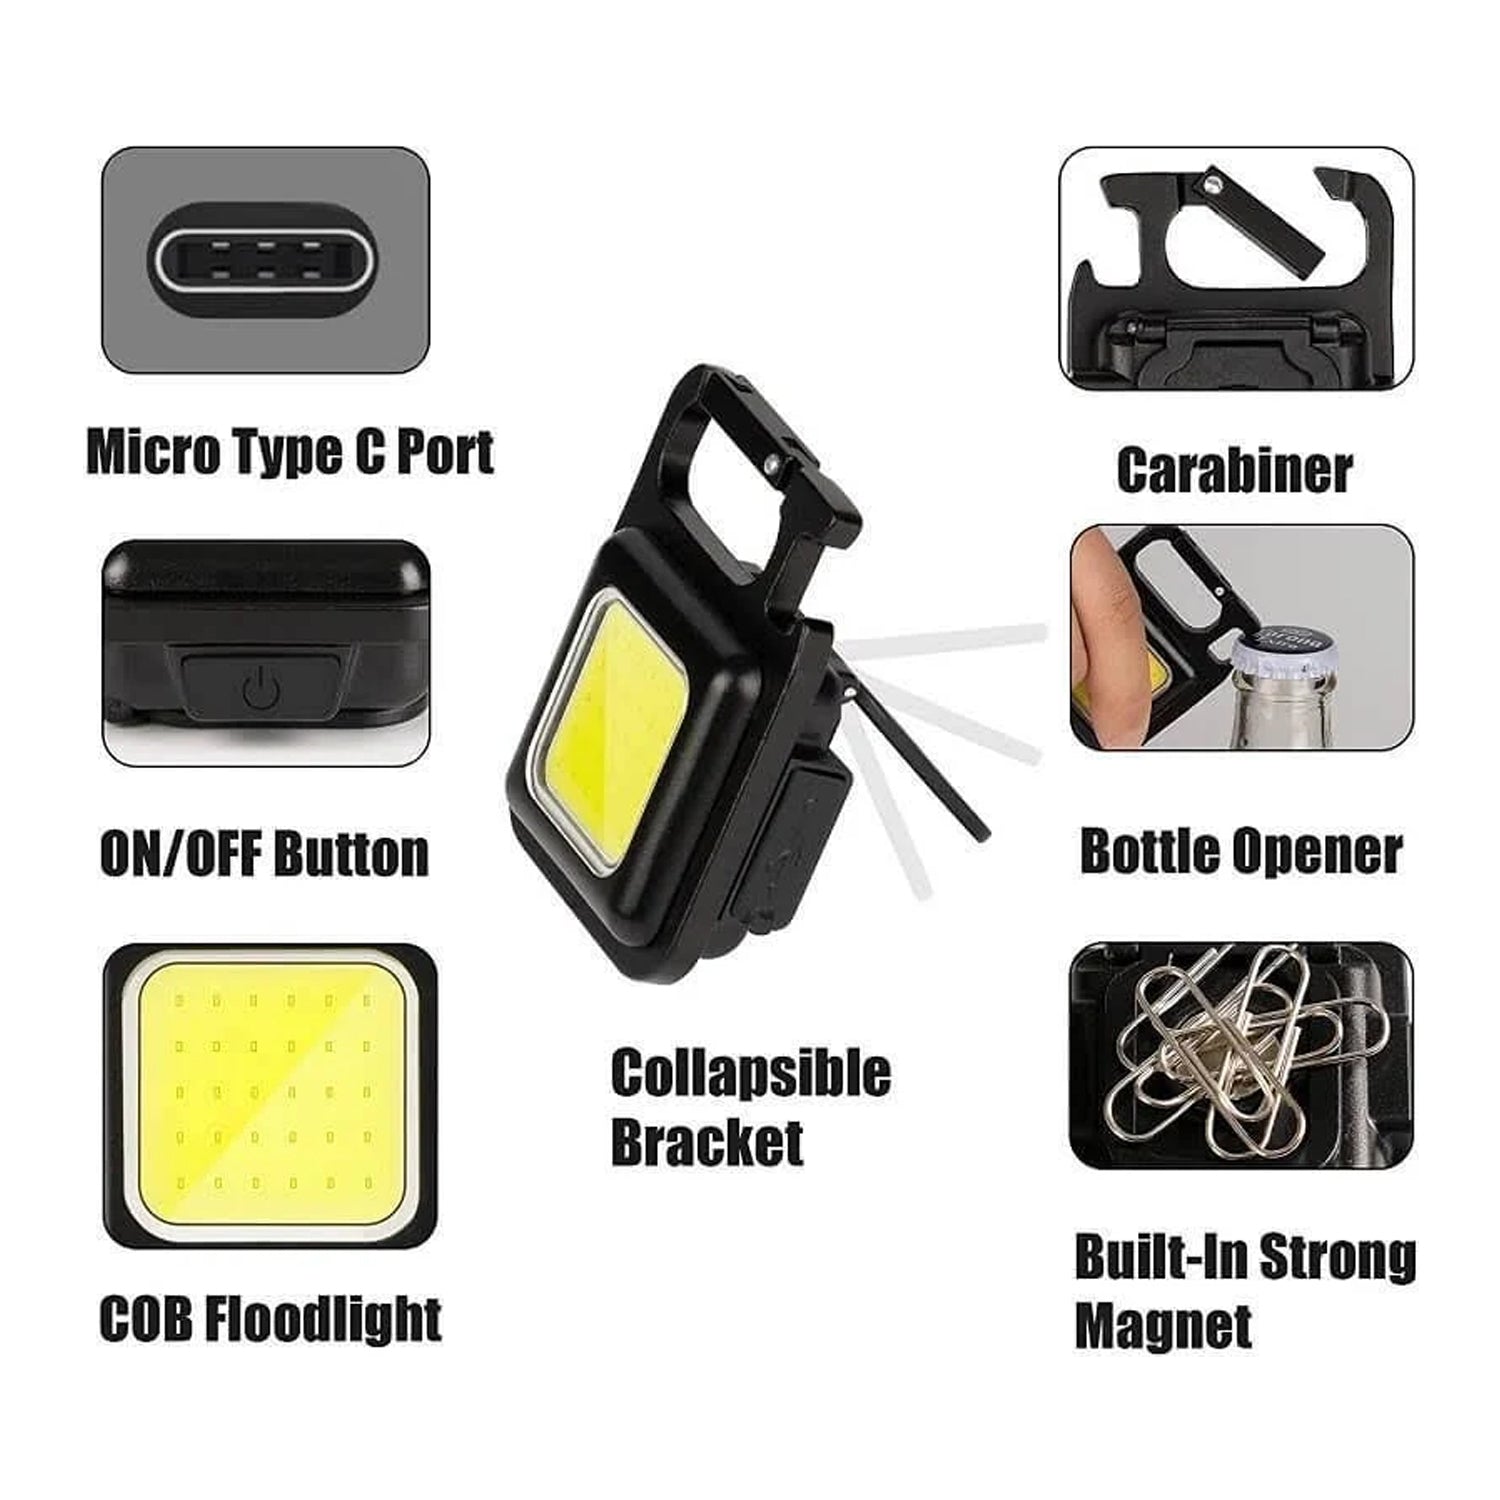 Rechargeable Keychain Mini Flashlight with 4 Light Modes,Ultralight Portable Pocket Light with Folding Bracket Bottle Opener and Magnet Base for Camping Walking